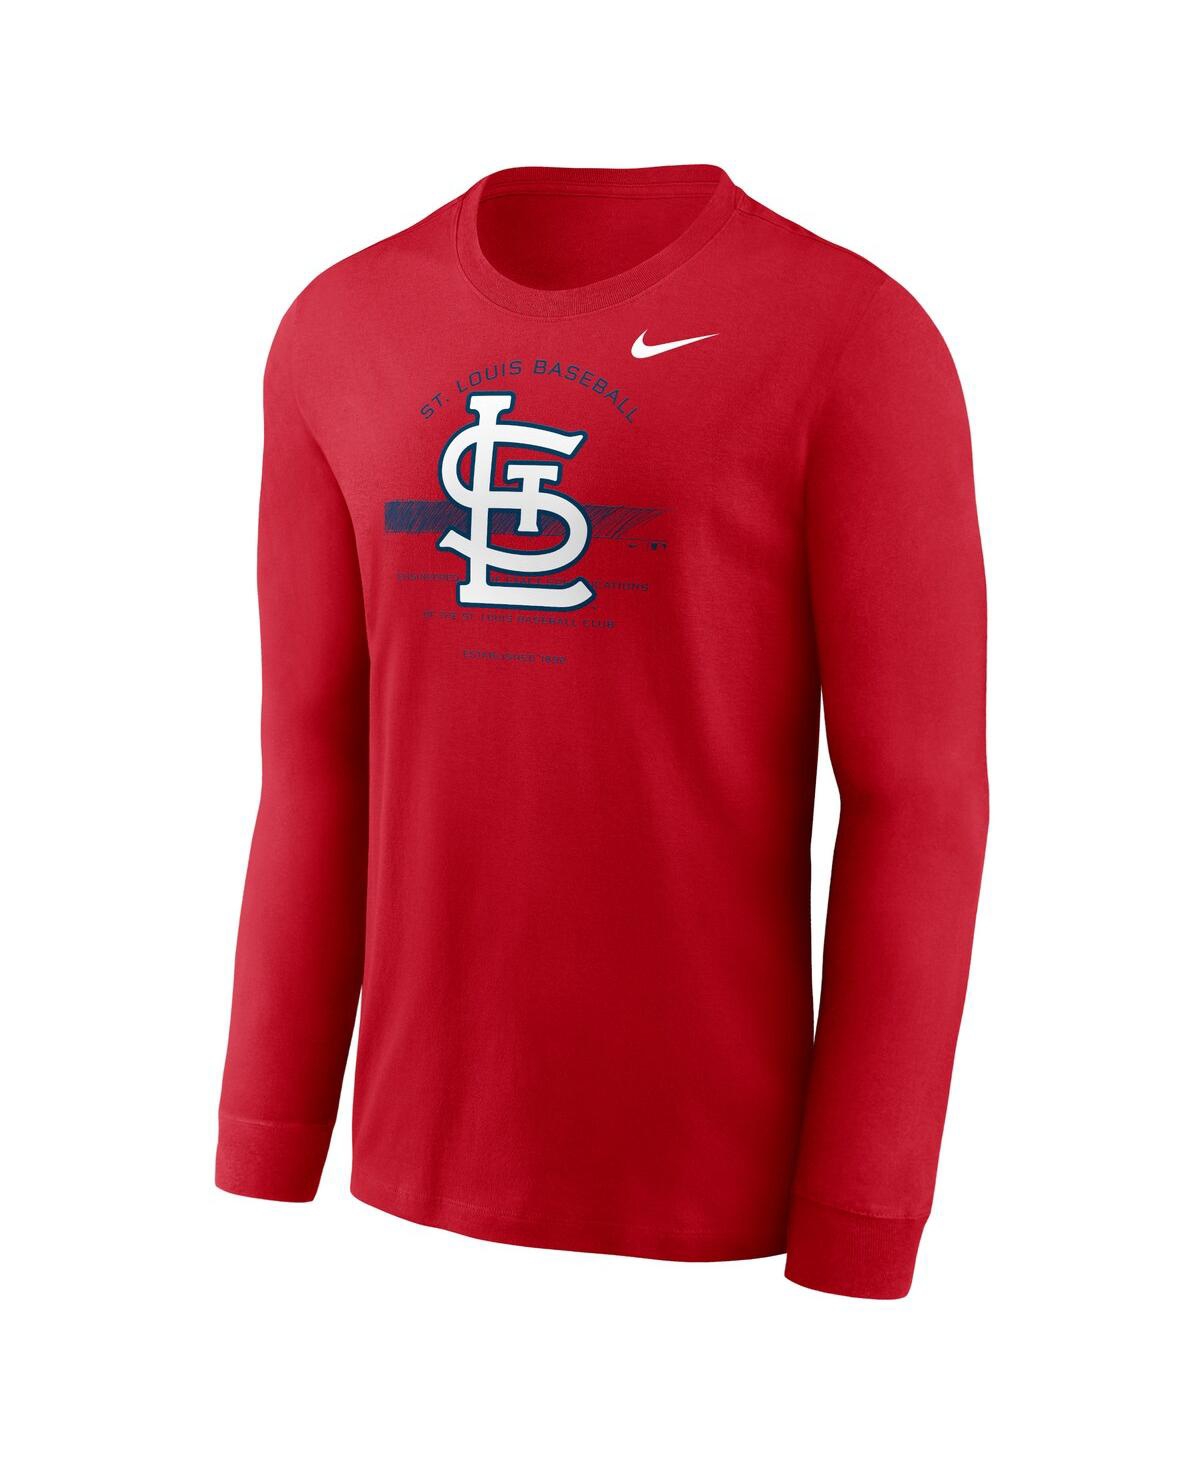 Shop Nike Men's  Red St. Louis Cardinals Over Arch Performance Long Sleeve T-shirt